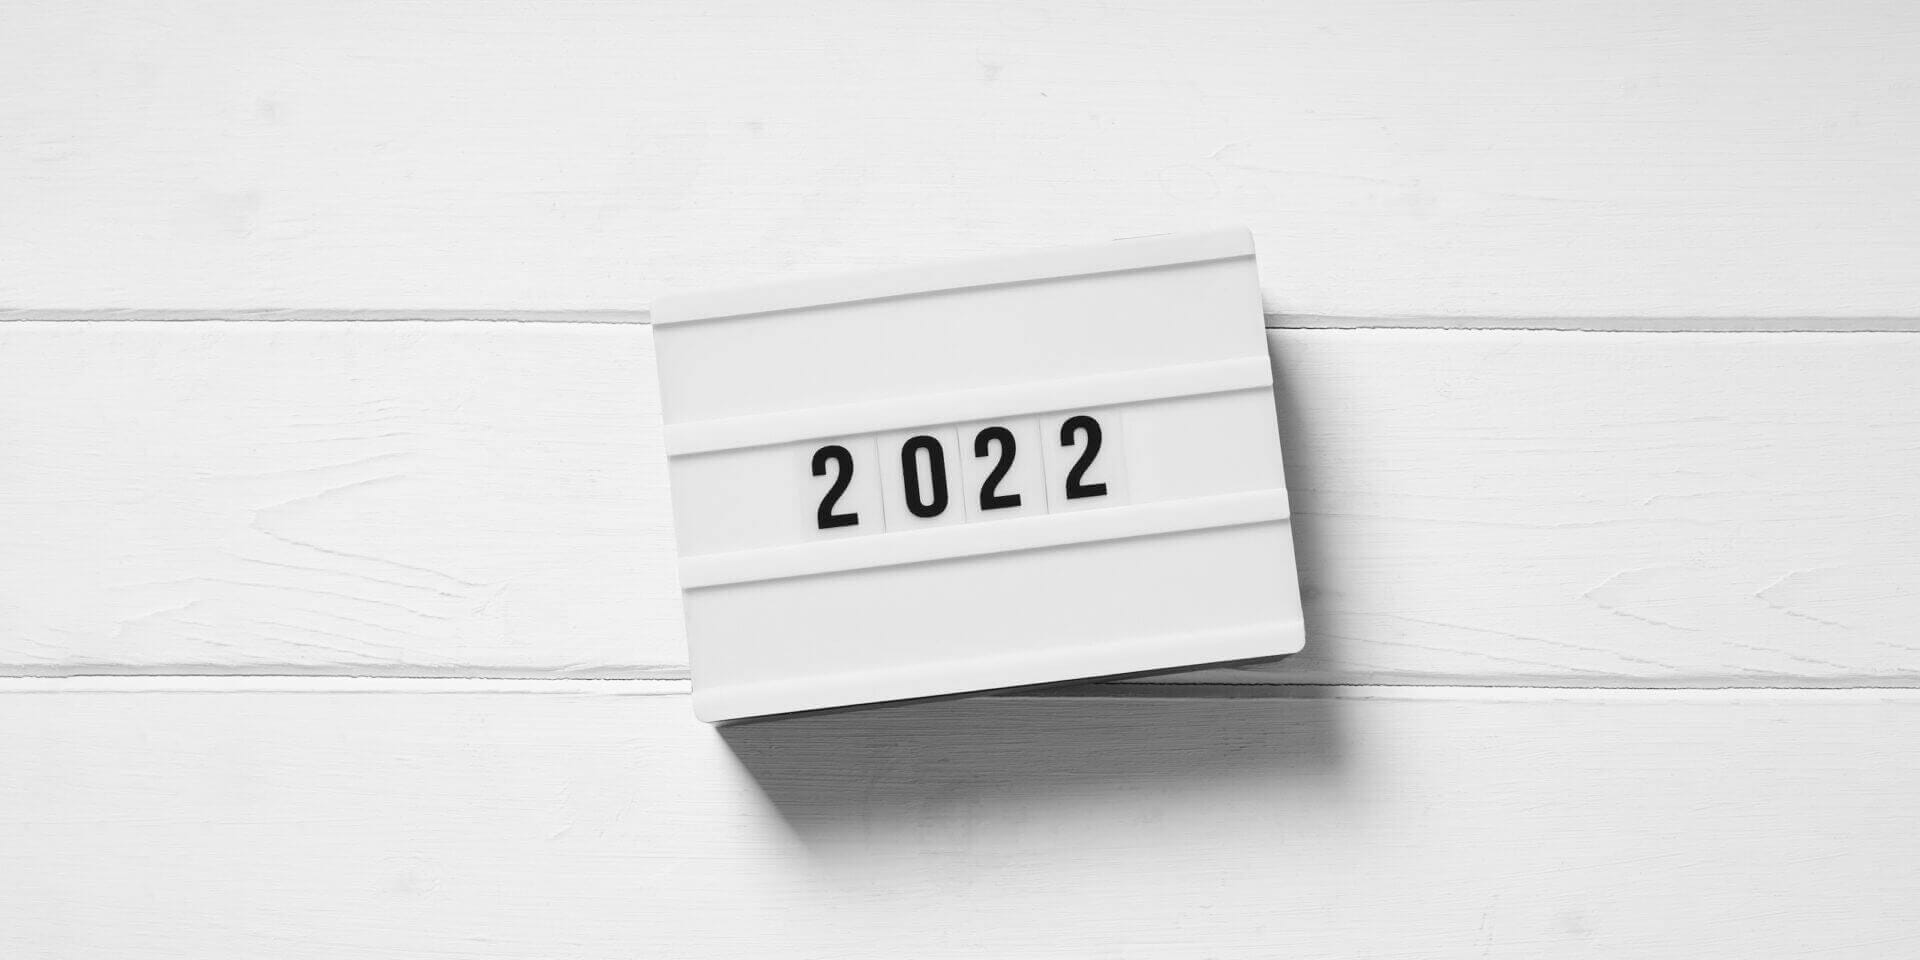 Banner depicting 2022 on a white background